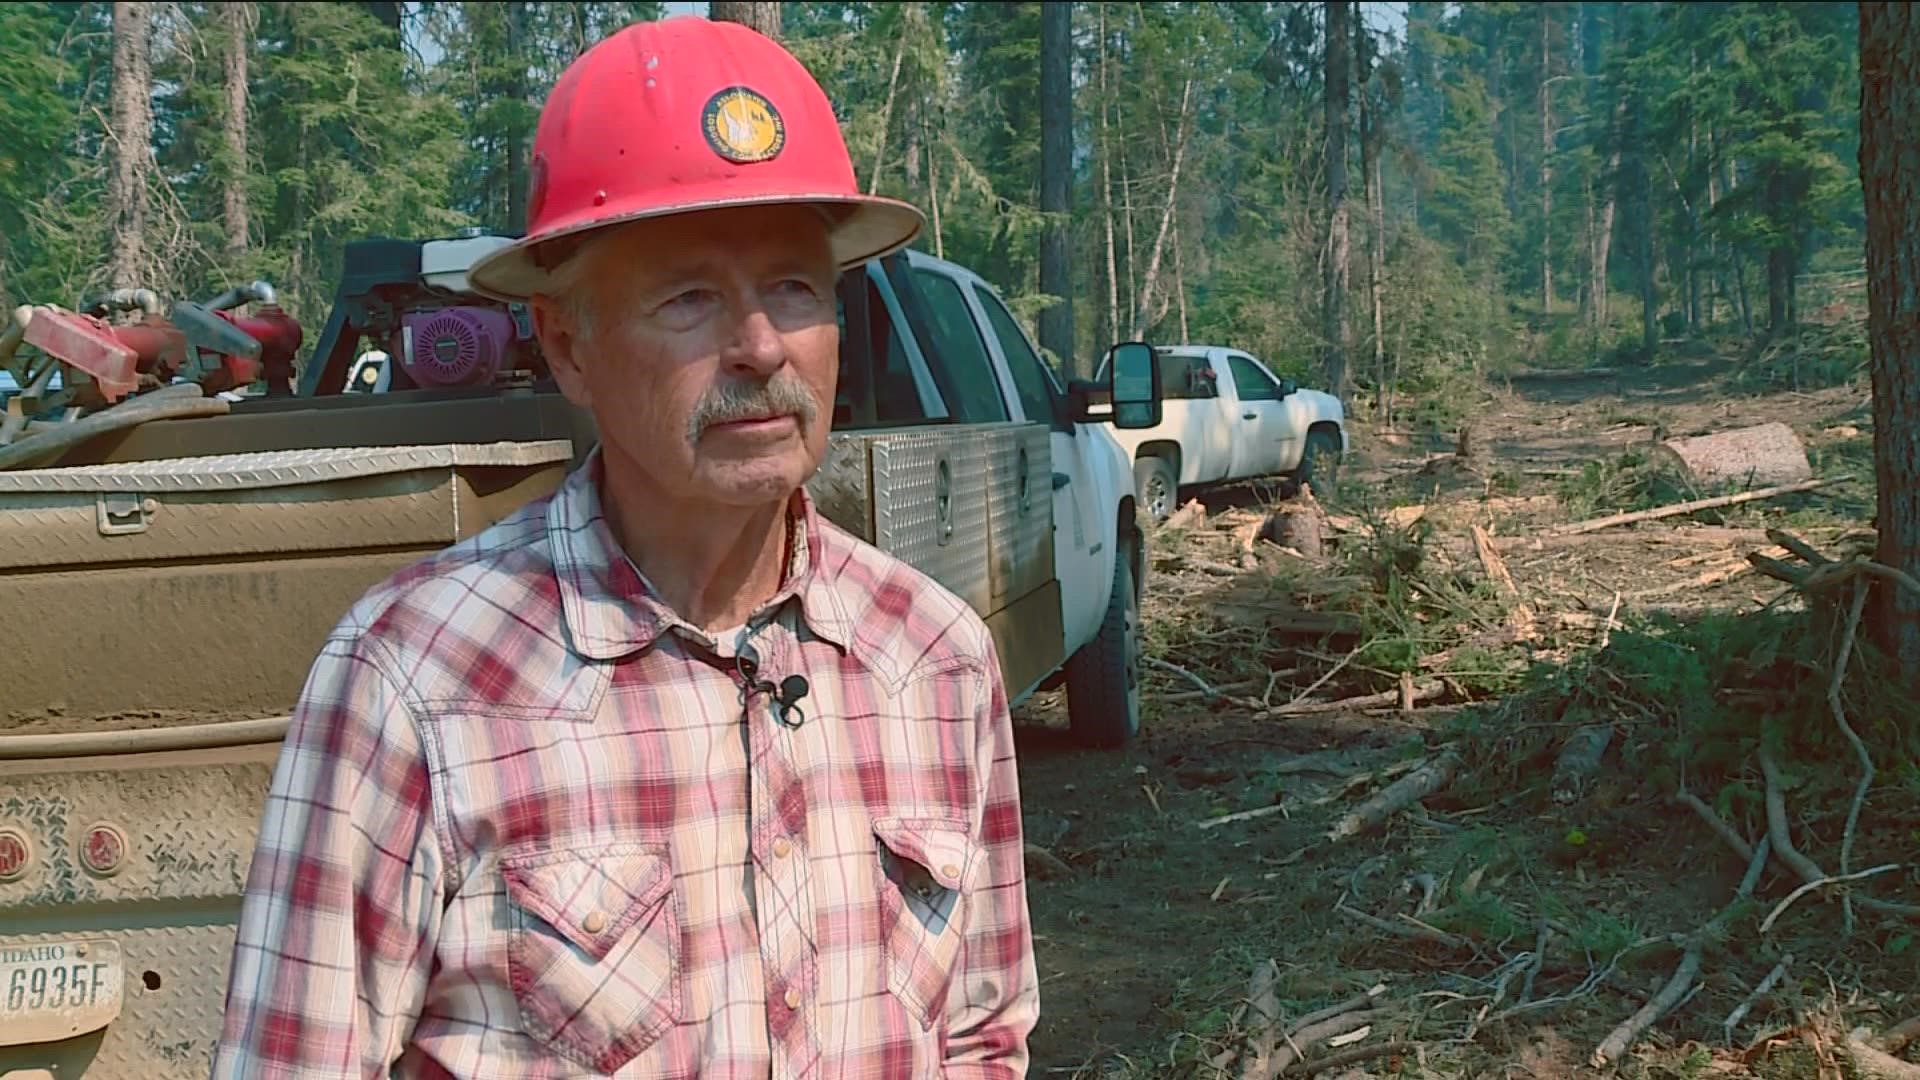 As the demand for timber continues to rise, the logging industry needs to expand. However, companies are struggling to find new people to fill job openings.